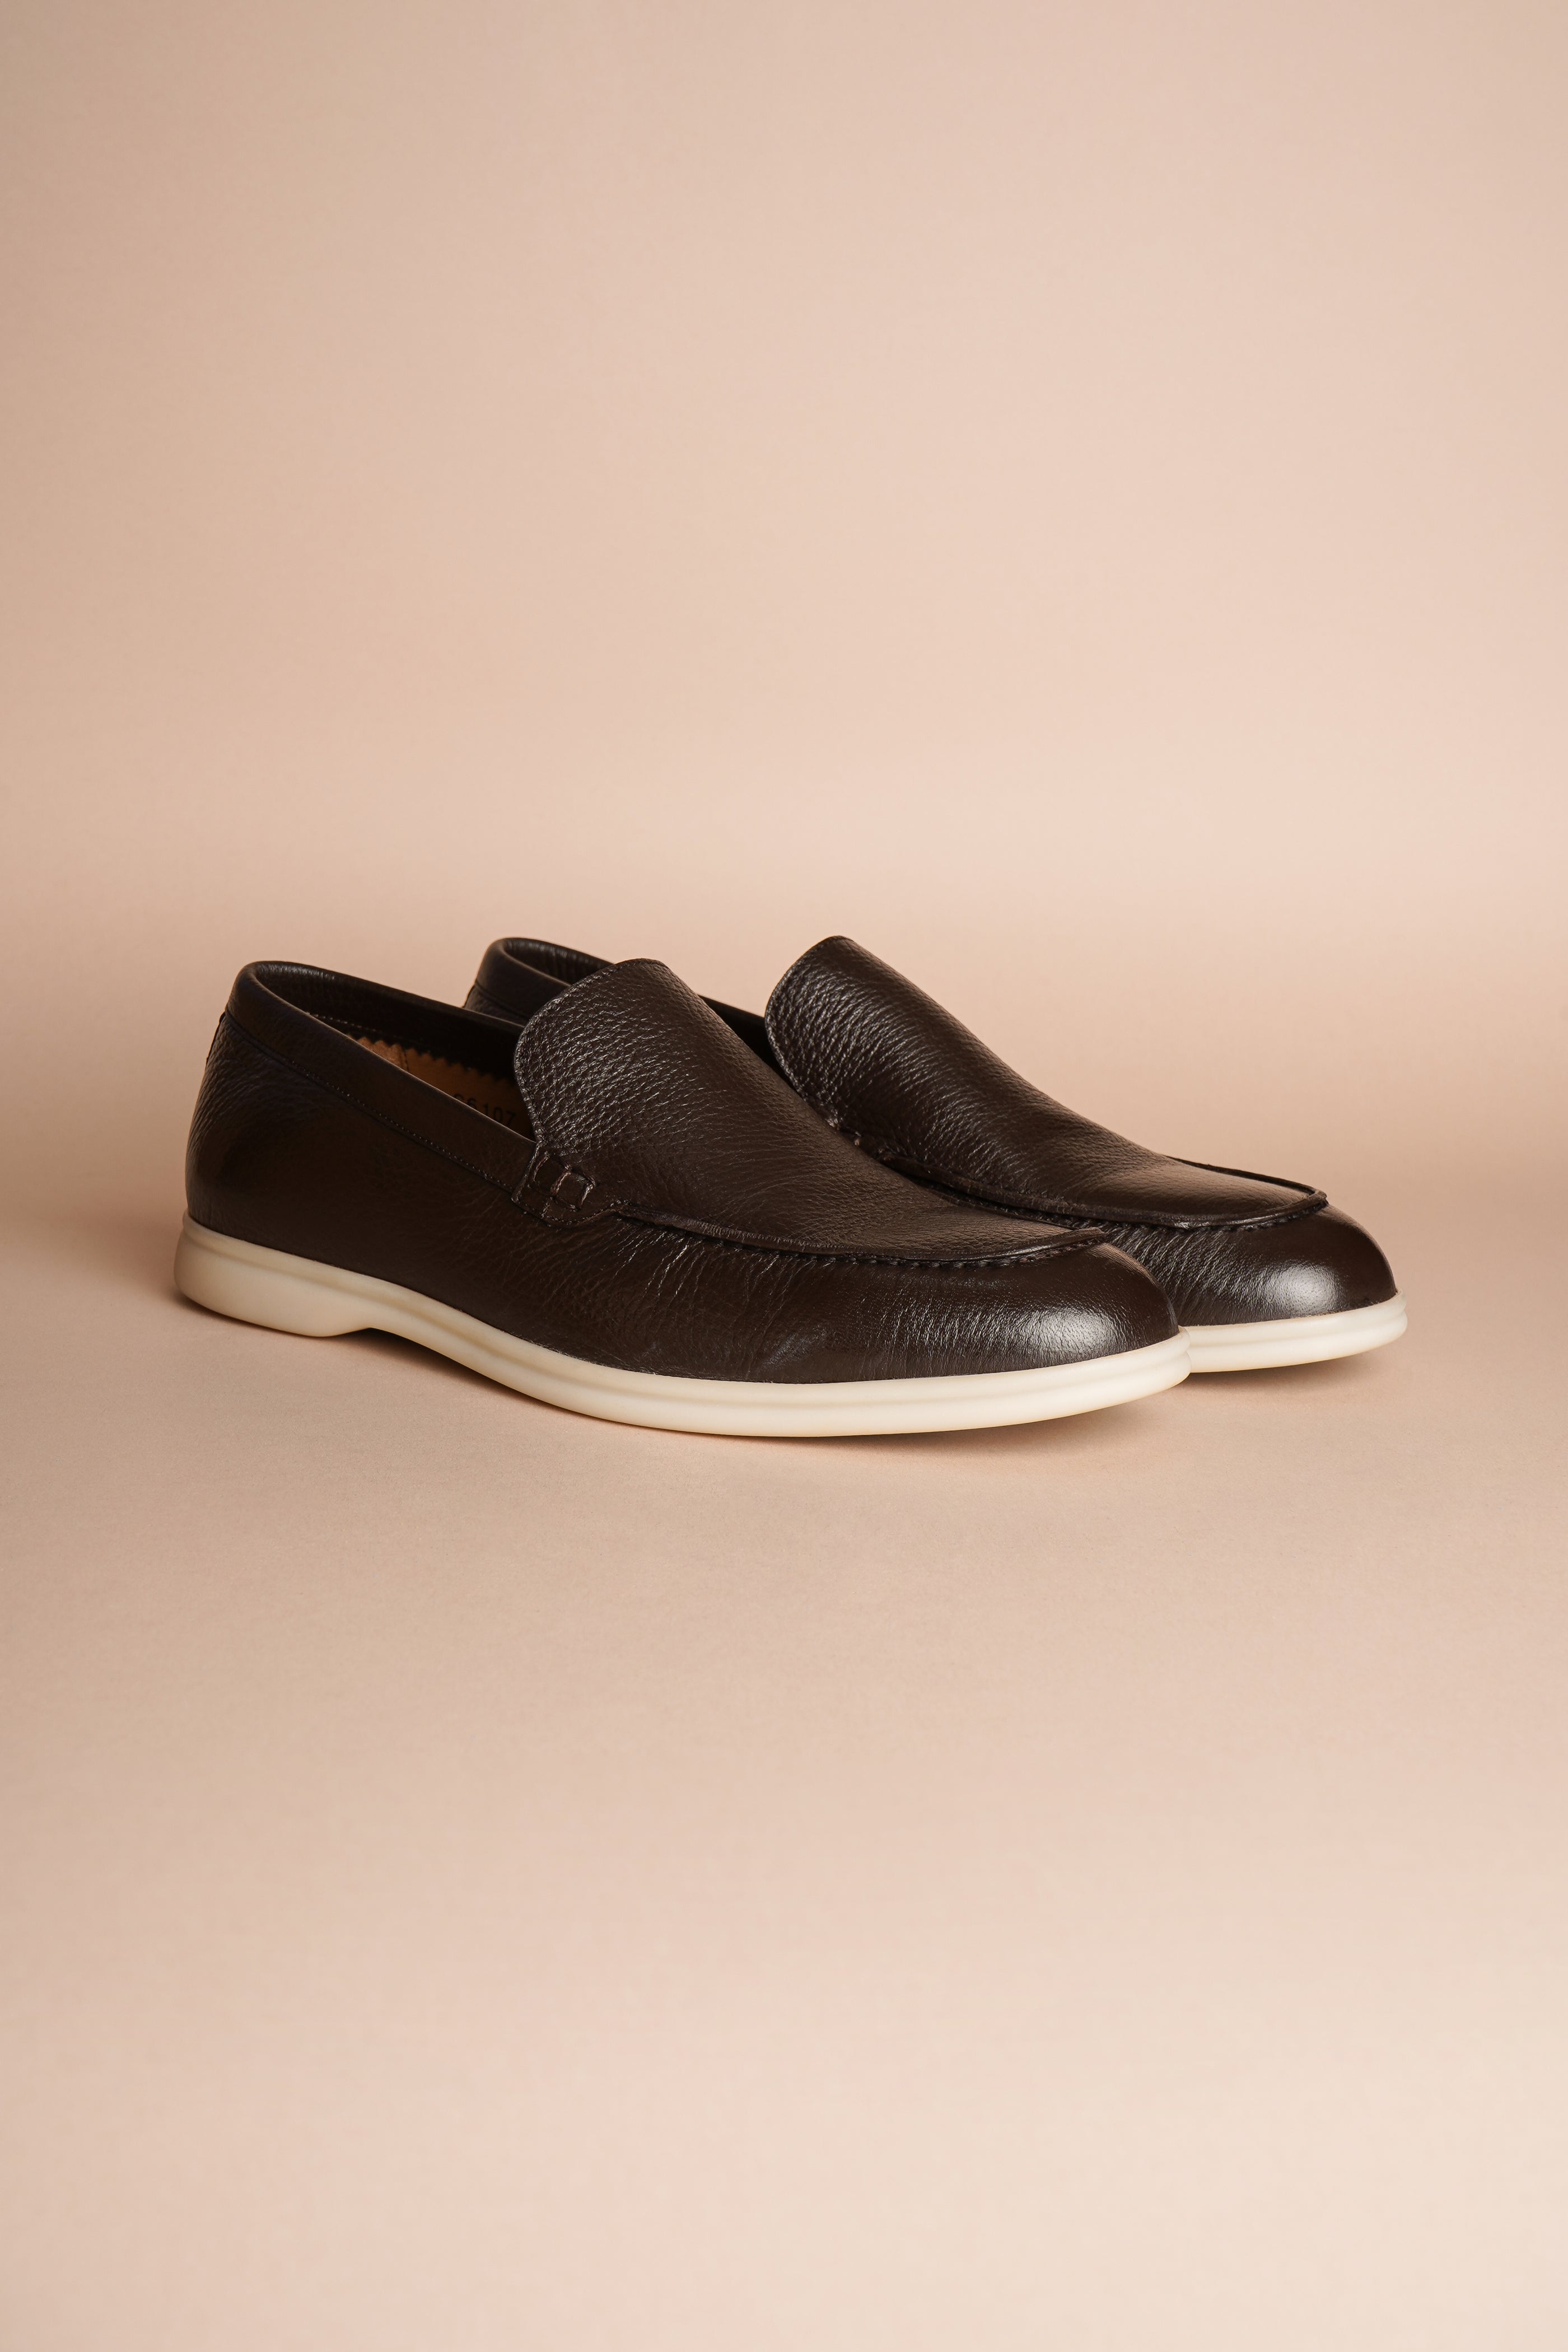 Beaumont Heritage Loafers